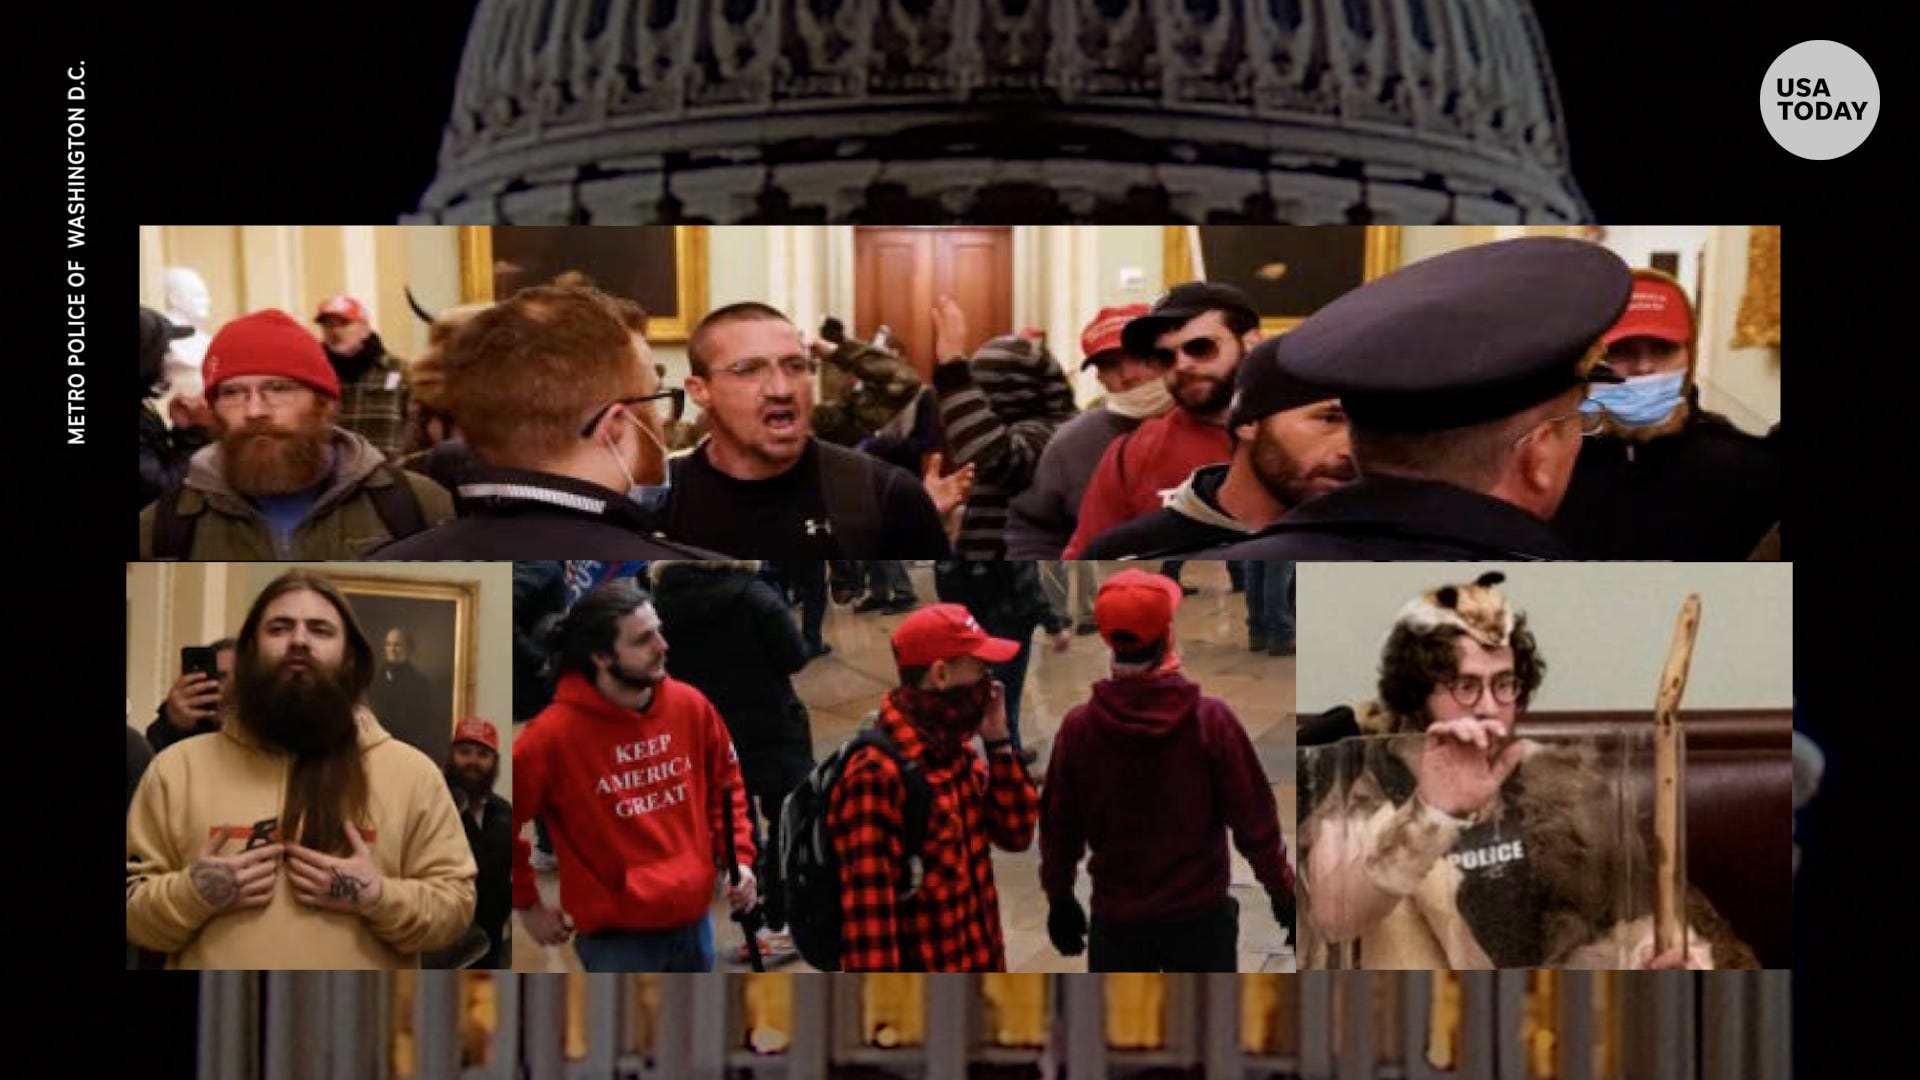 Capitol riot inquiry grows to 400 suspects; feds expect to bring sedition charges 'very soon'